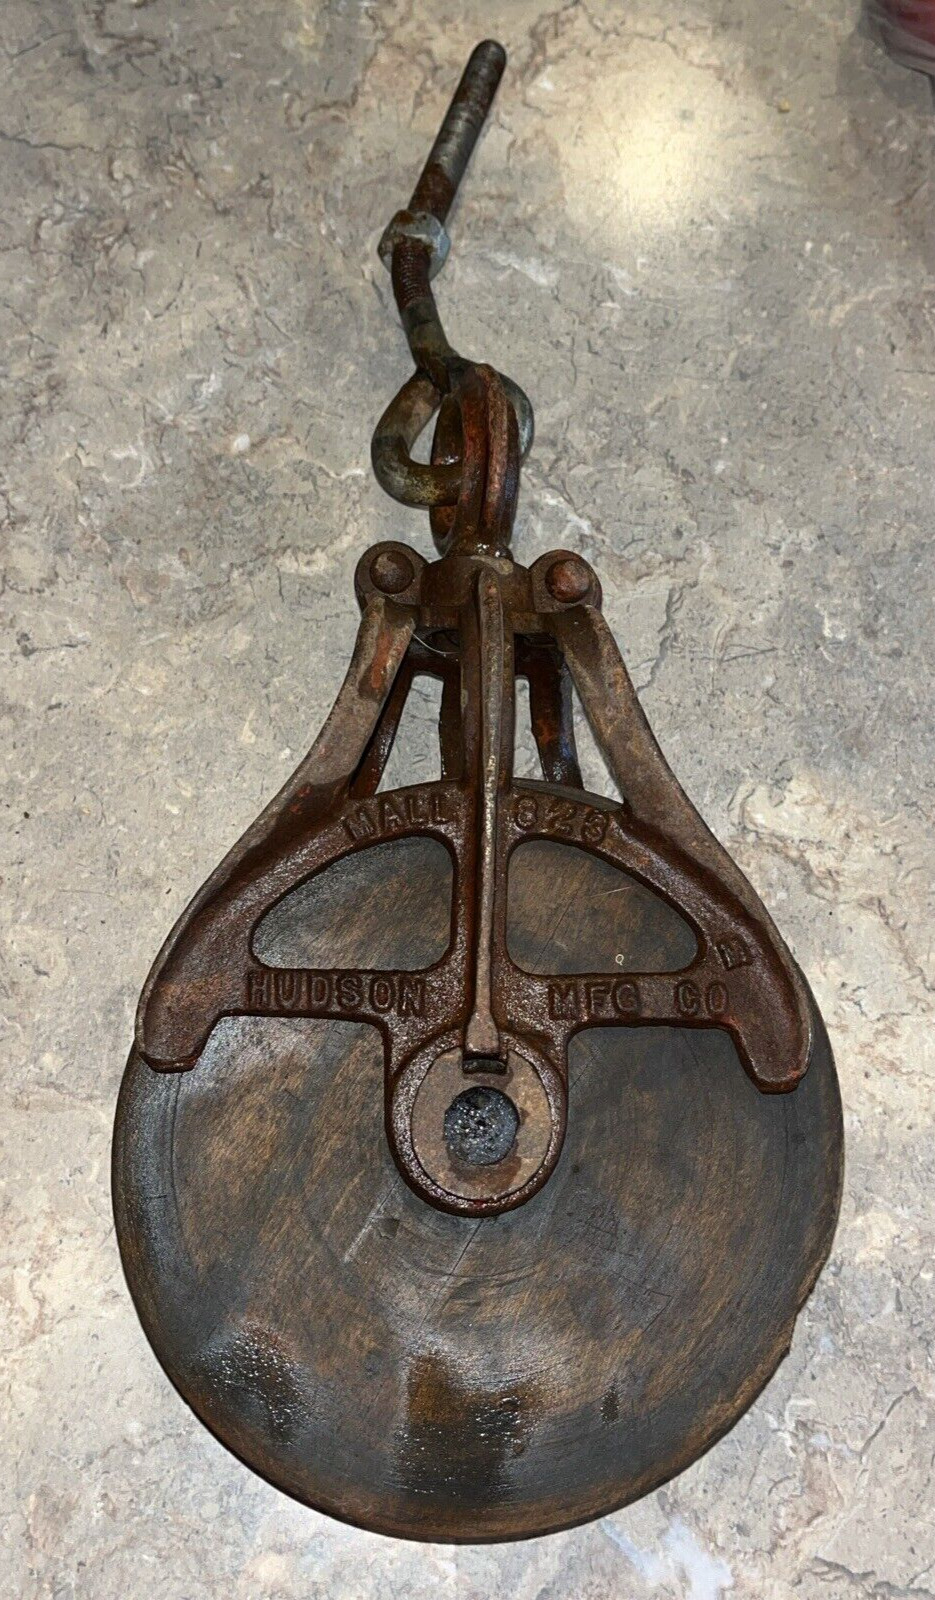 Vintage Hudson 823 Barn Pulley, Antique Wood Cast Iron Block Tackle Farm Tool